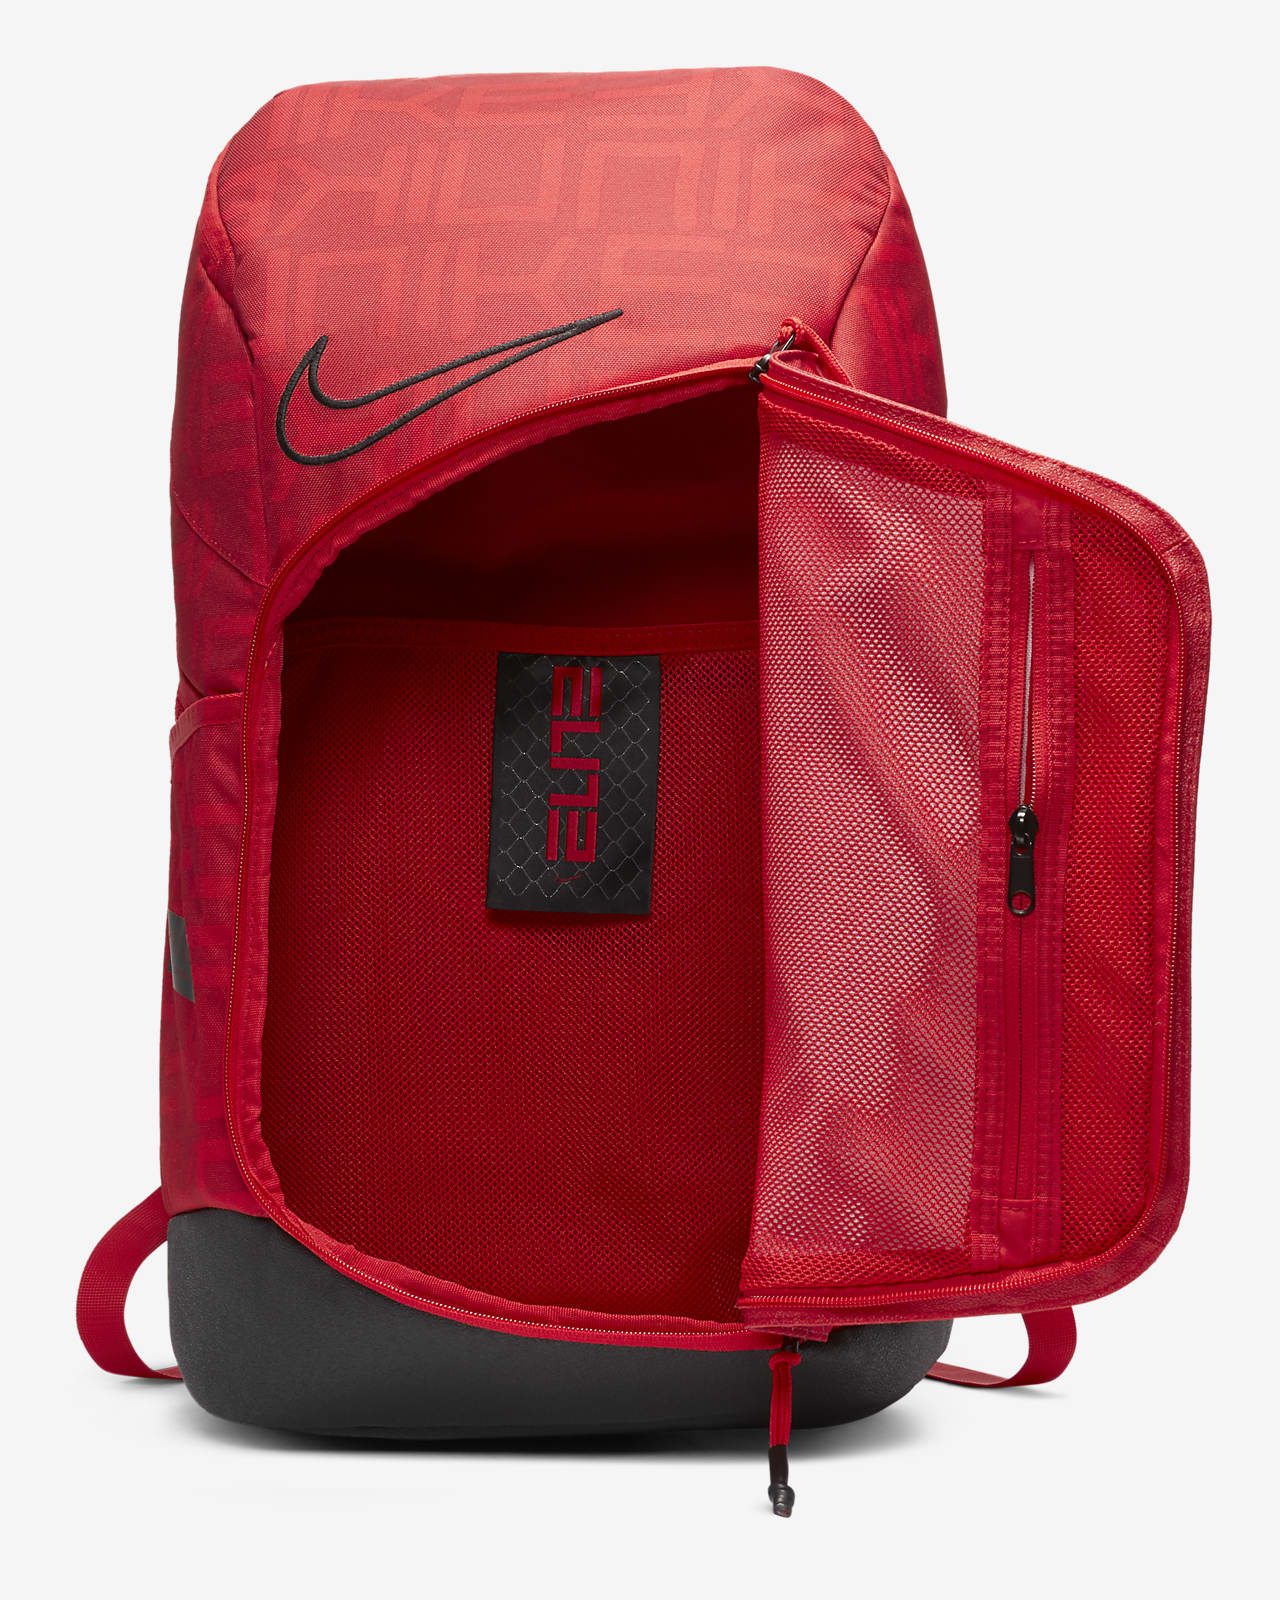 nike elite pro backpack review